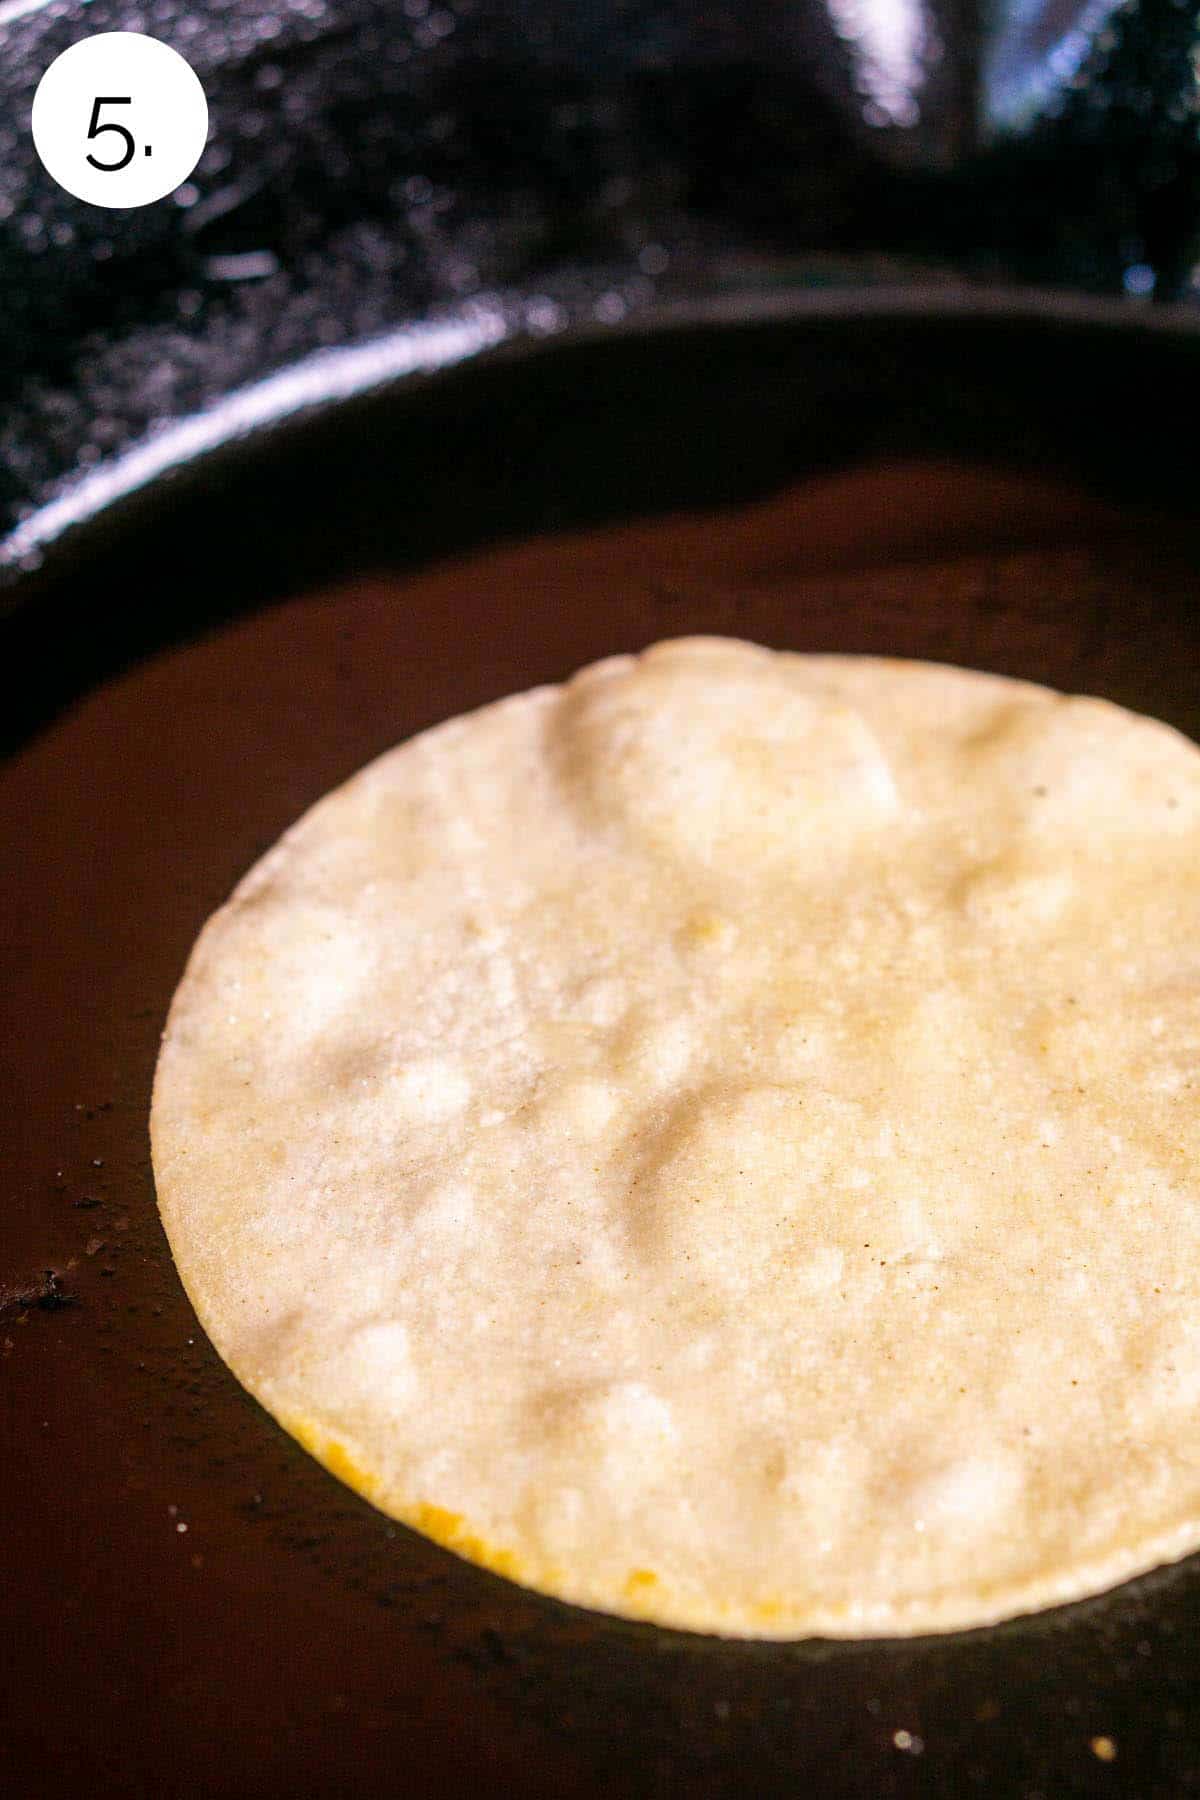 A corn tortilla frying in oil in a black cast-iron skillet on the stove to make it pliable.